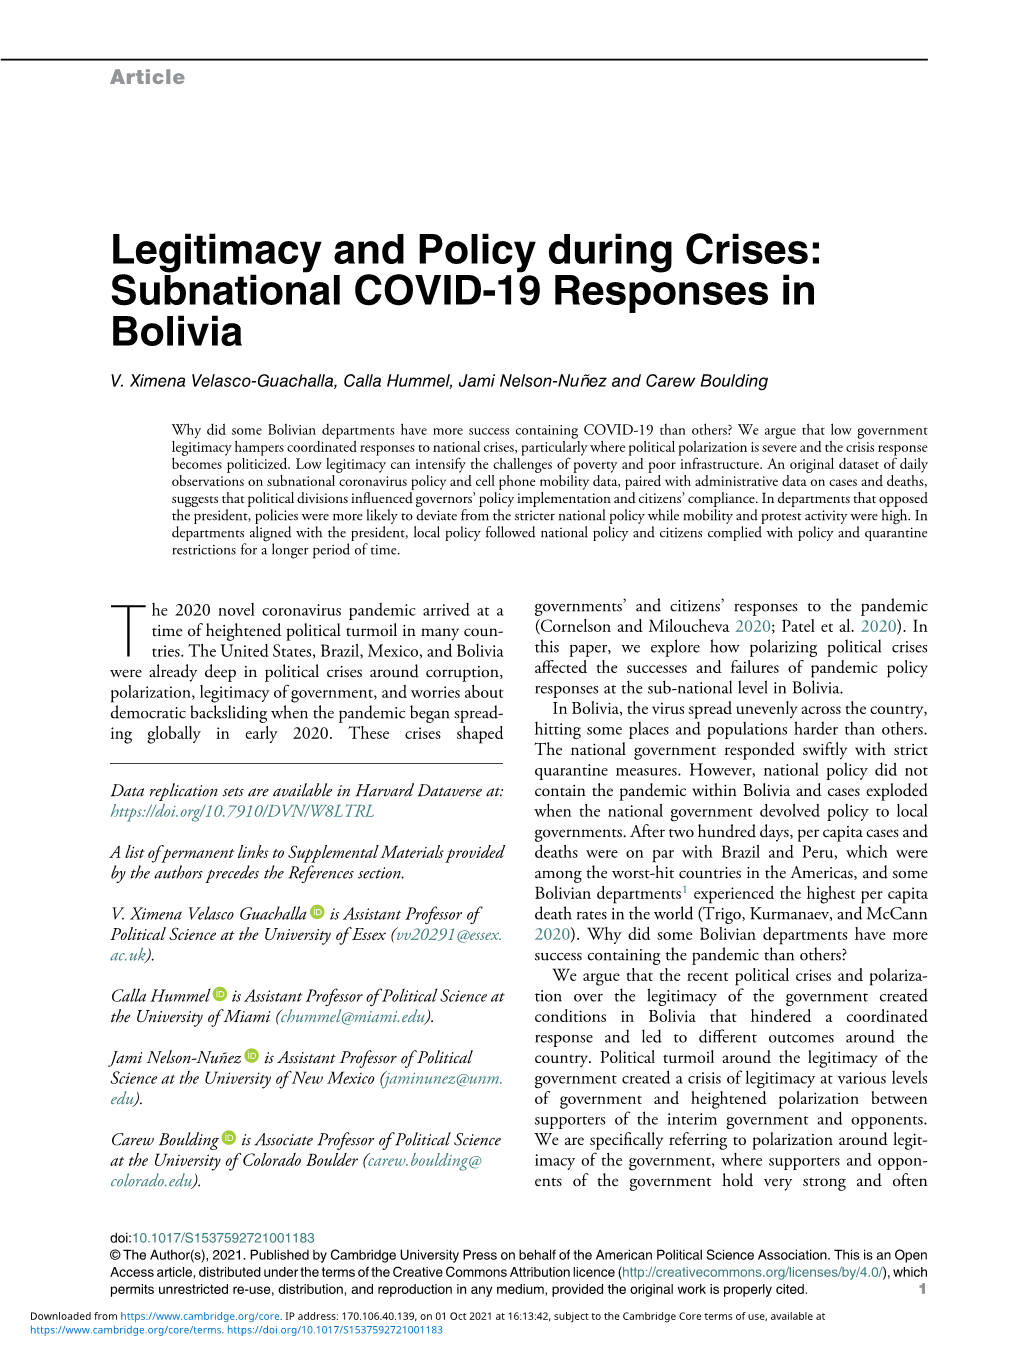 Legitimacy and Policy During Crises: Subnational COVID-19 Responses in Bolivia